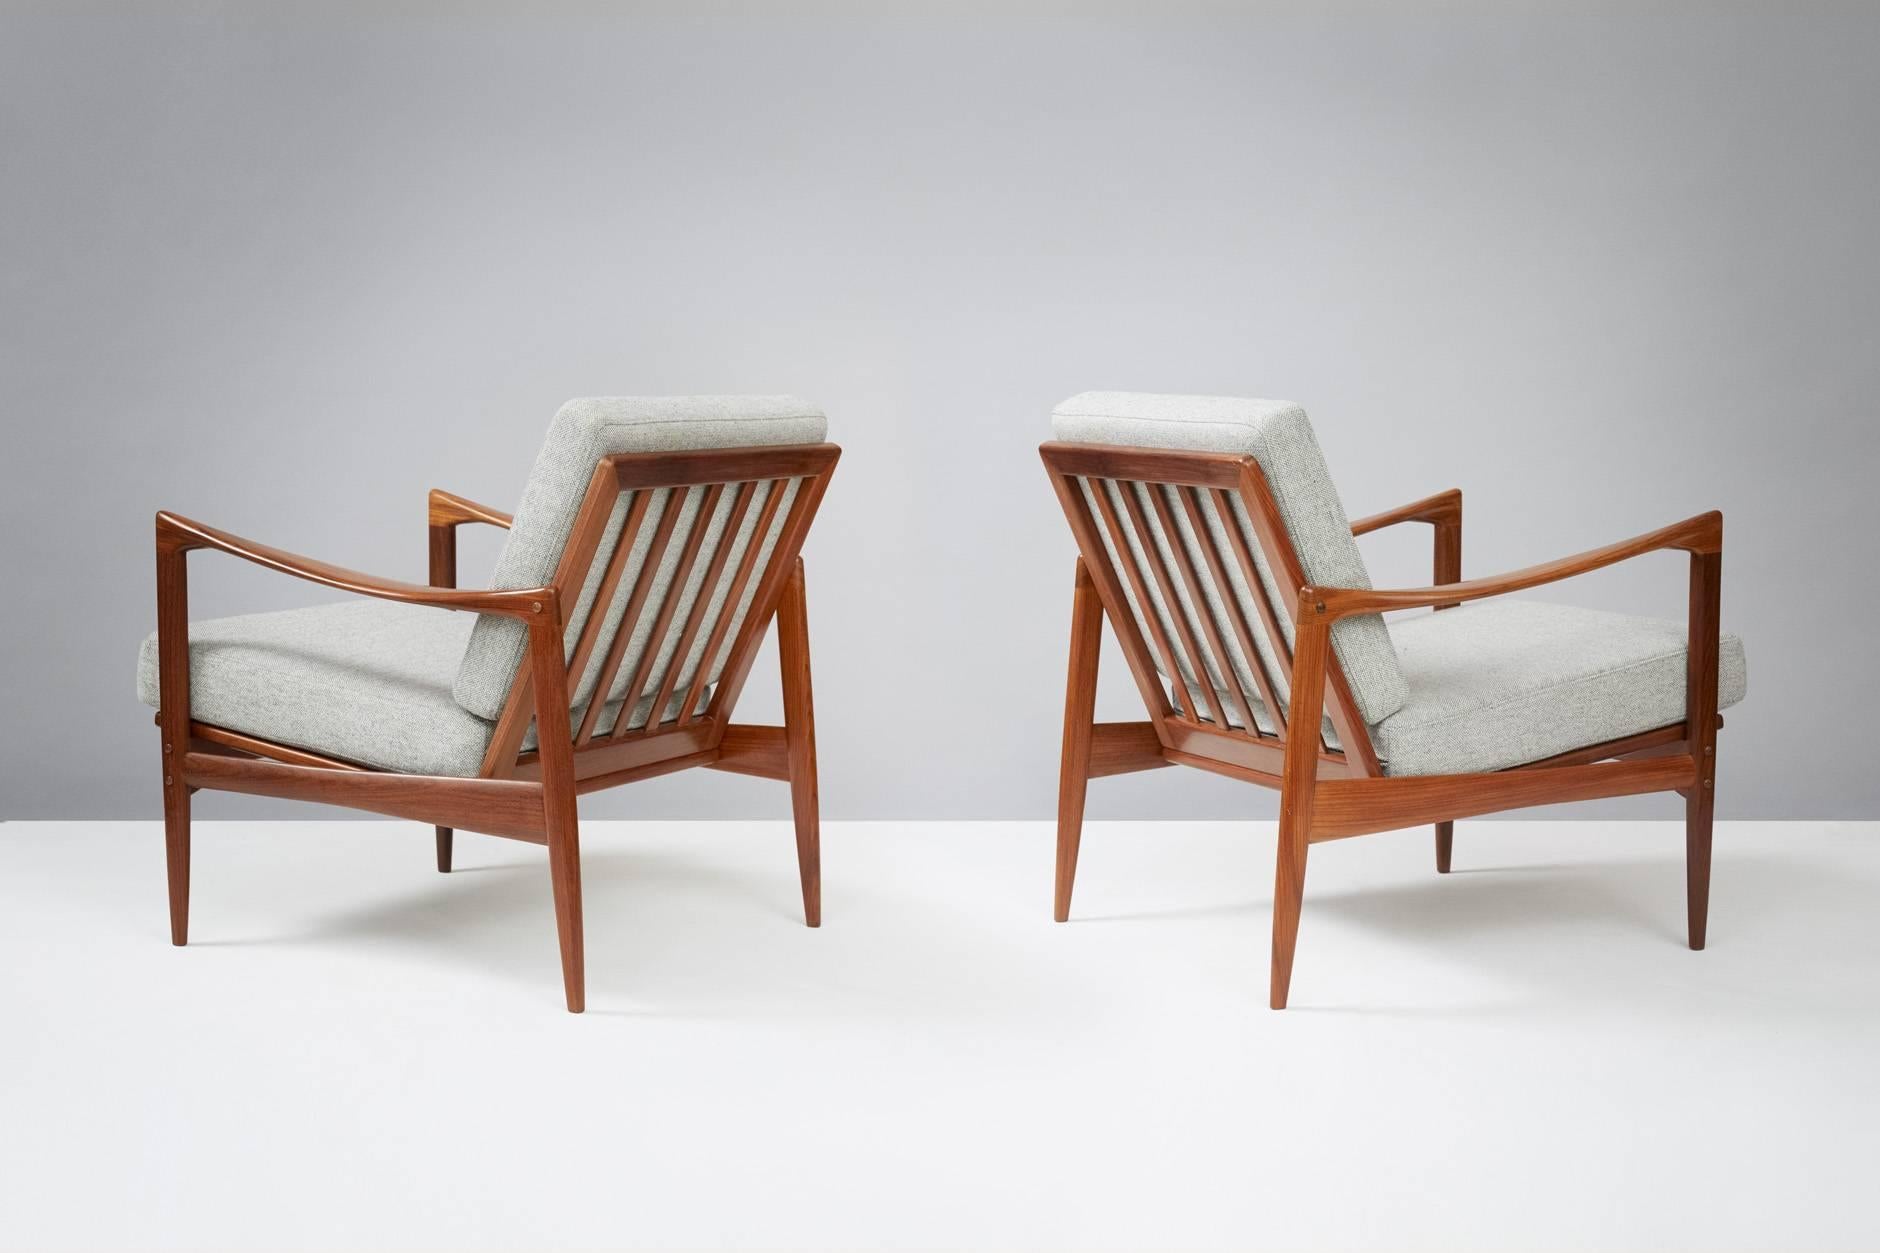 Ib Kofod-Larsen

Candidate chairs, circa 1960

Pair of Afromosia teak lounge chairs produced by OPE, Sweden, circa 1960. New cushions covered in Kvadrat Hallingdal #116 wool fabric.